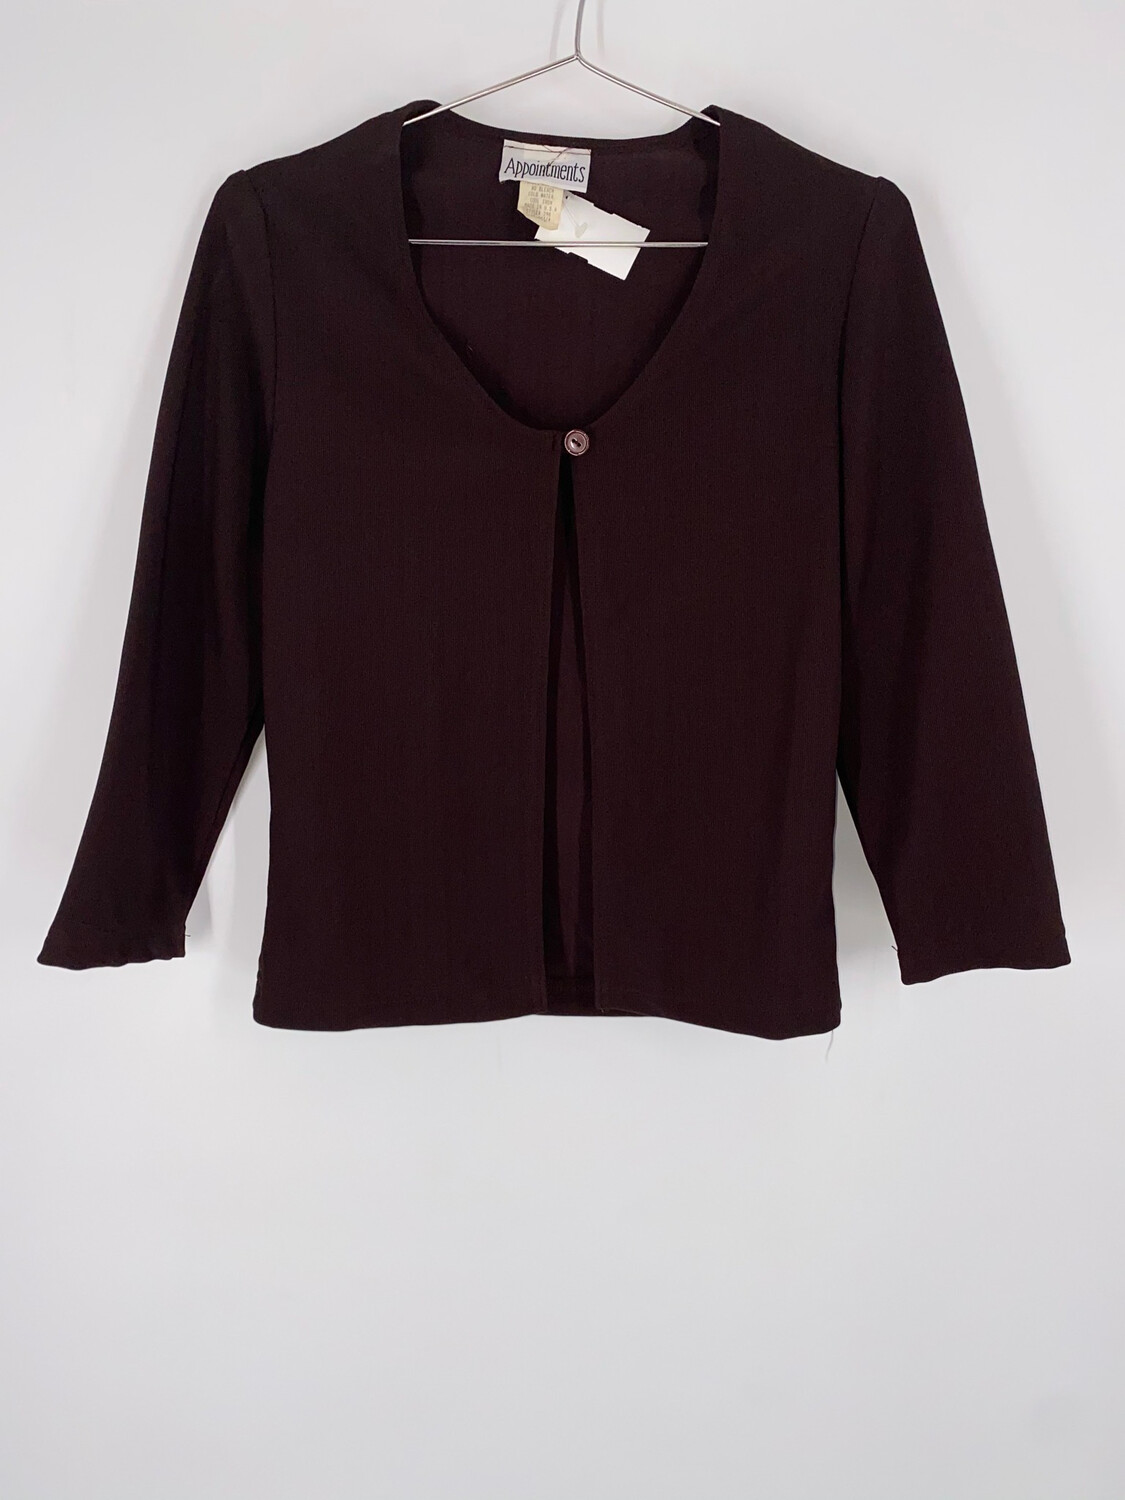 Appointments Tie-front Top Size L